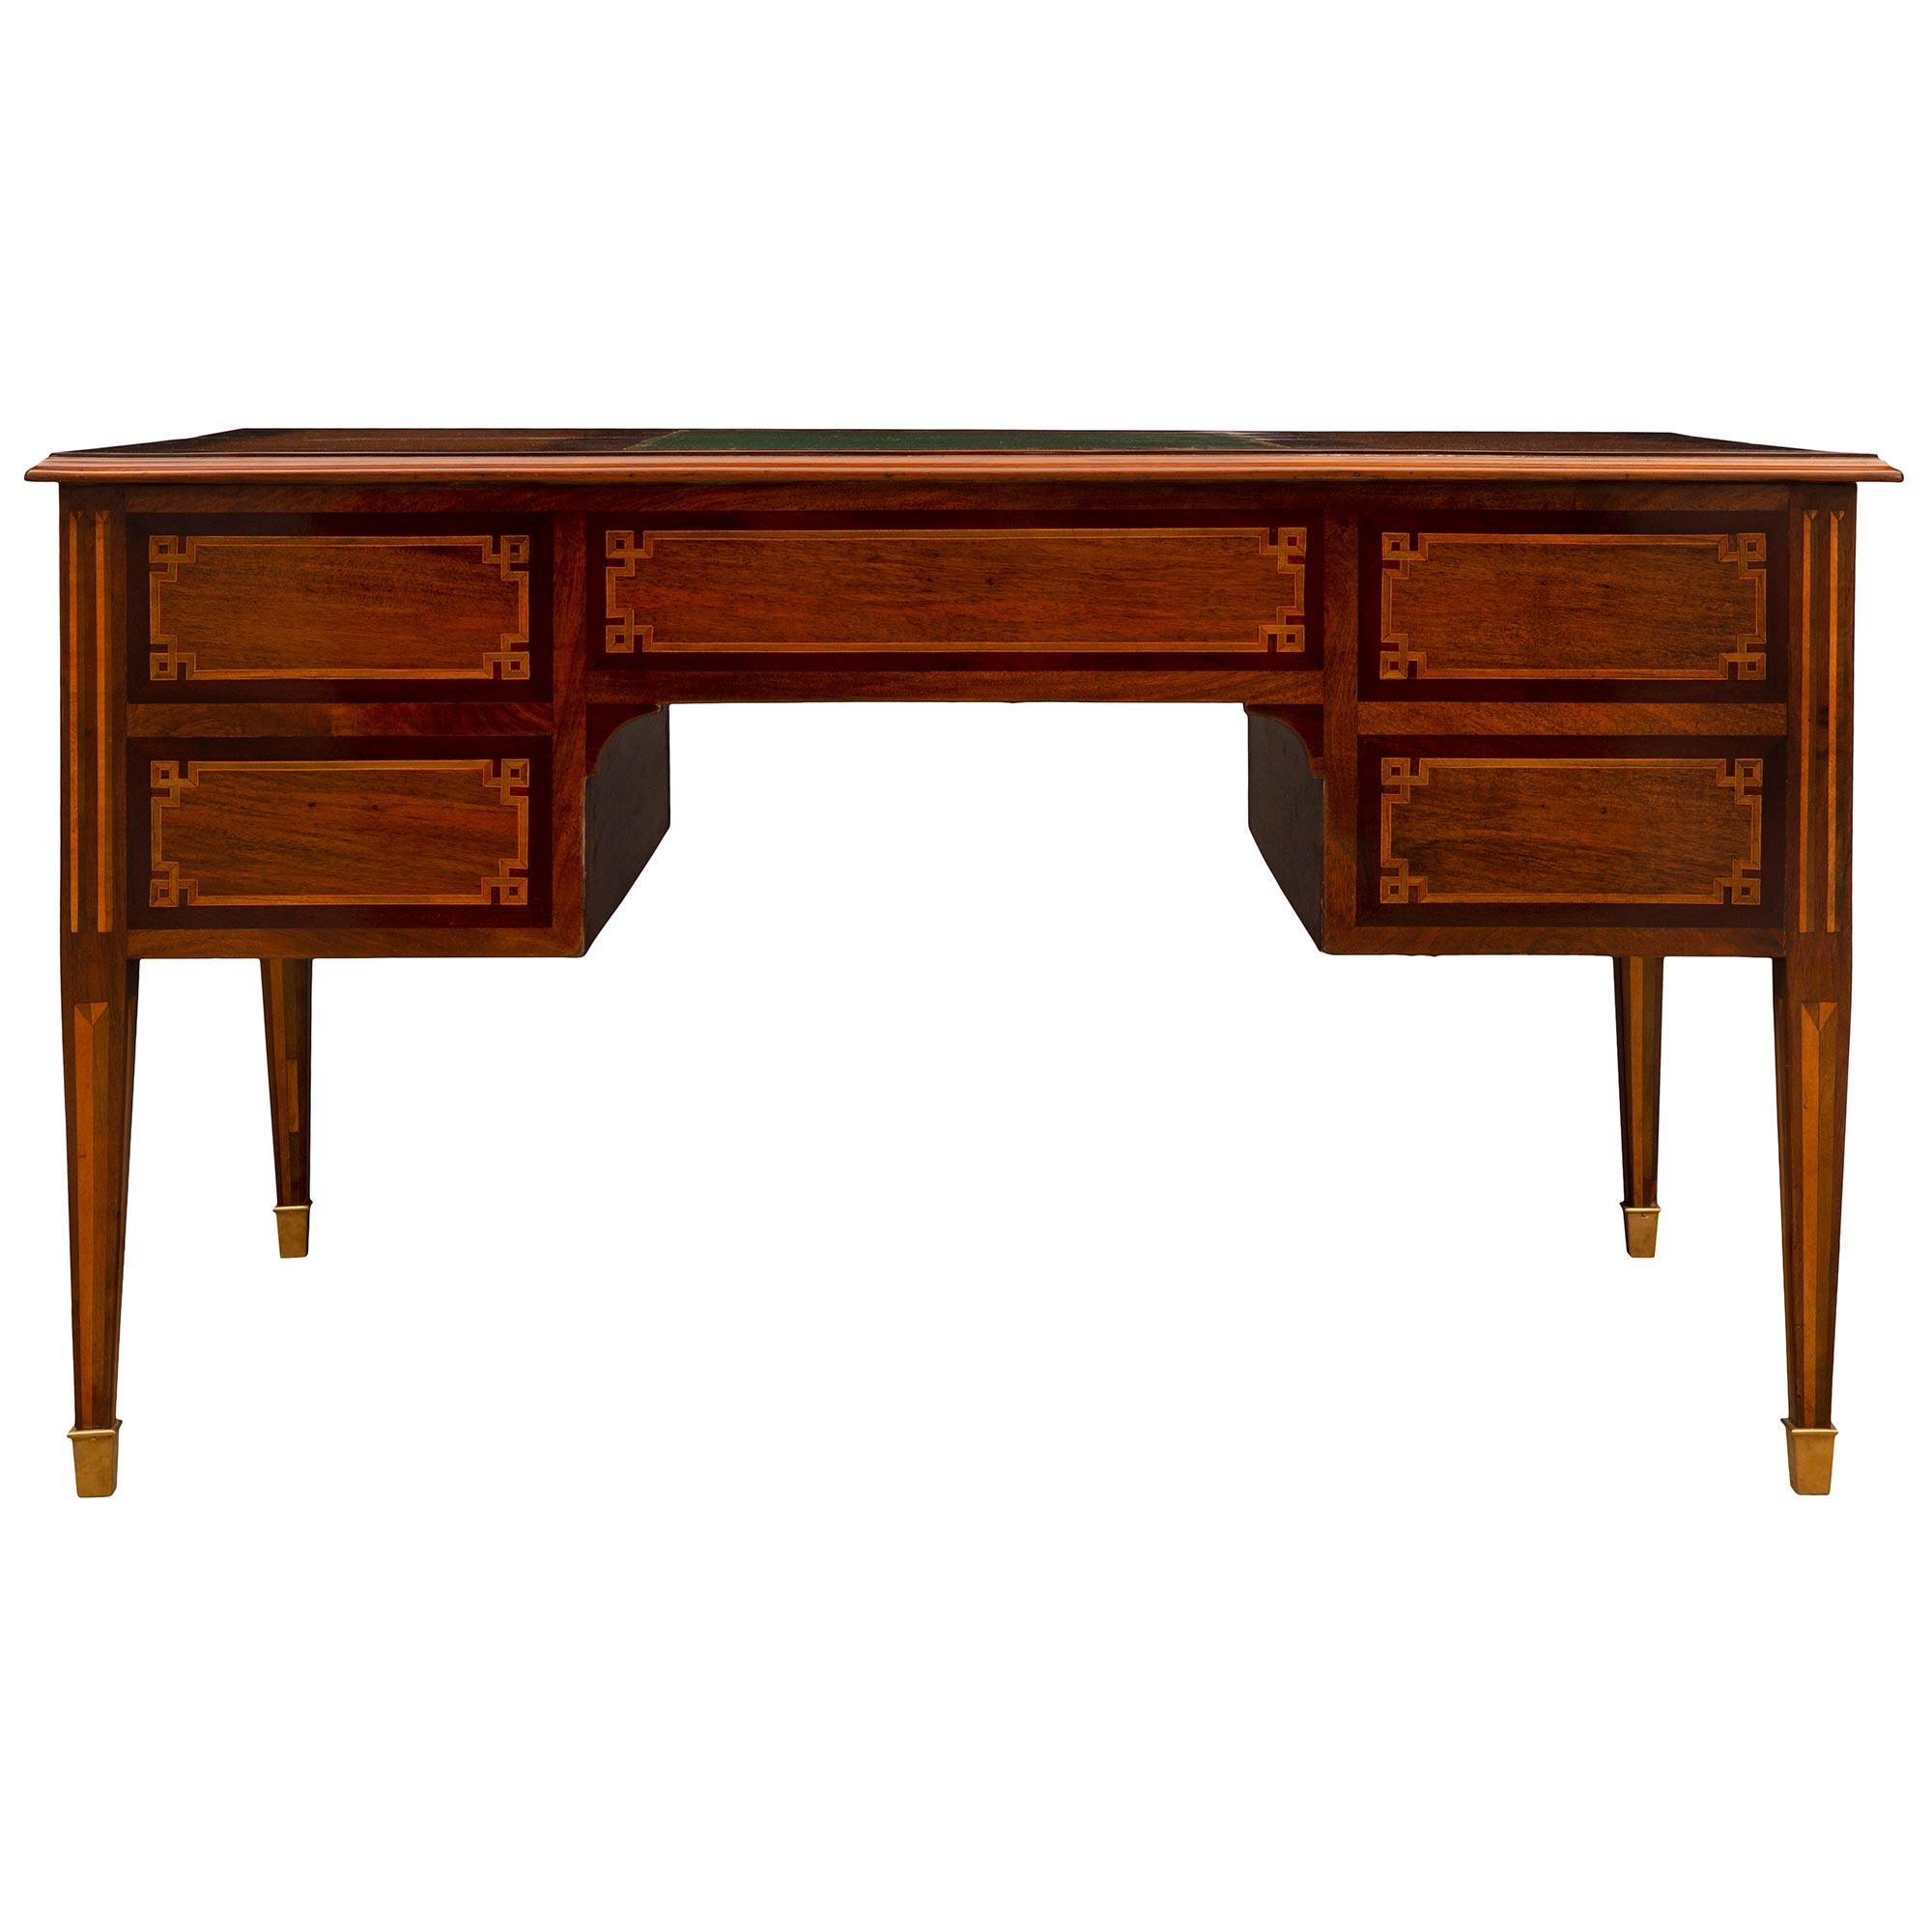 French 19th Century Louis XVI Style Mahogany Desk In Good Condition For Sale In West Palm Beach, FL